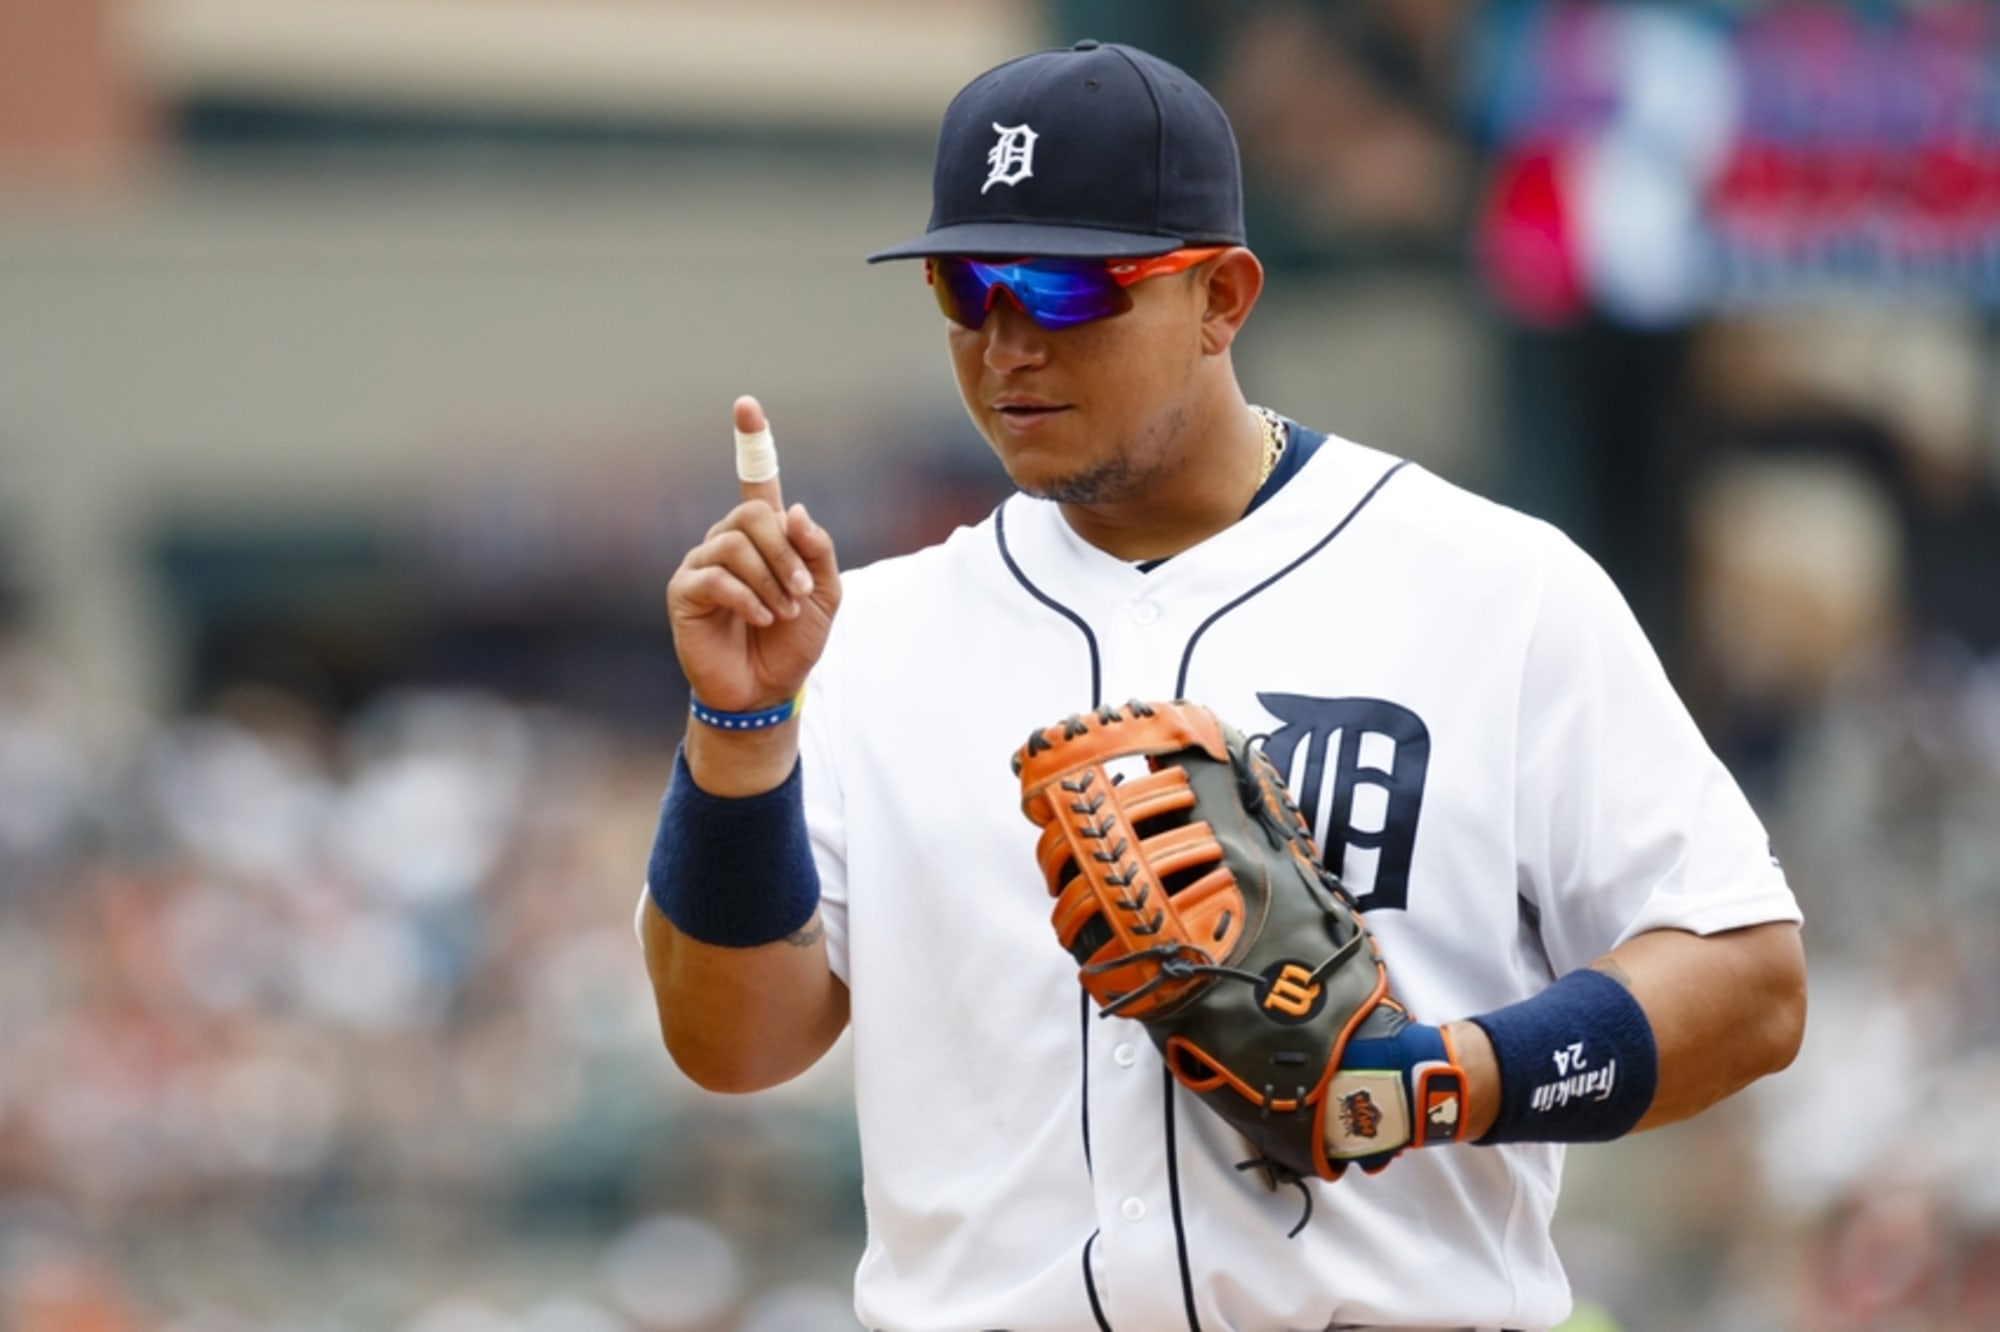 What Detroit Tigers Player is the Most Like "The Bird" Today?